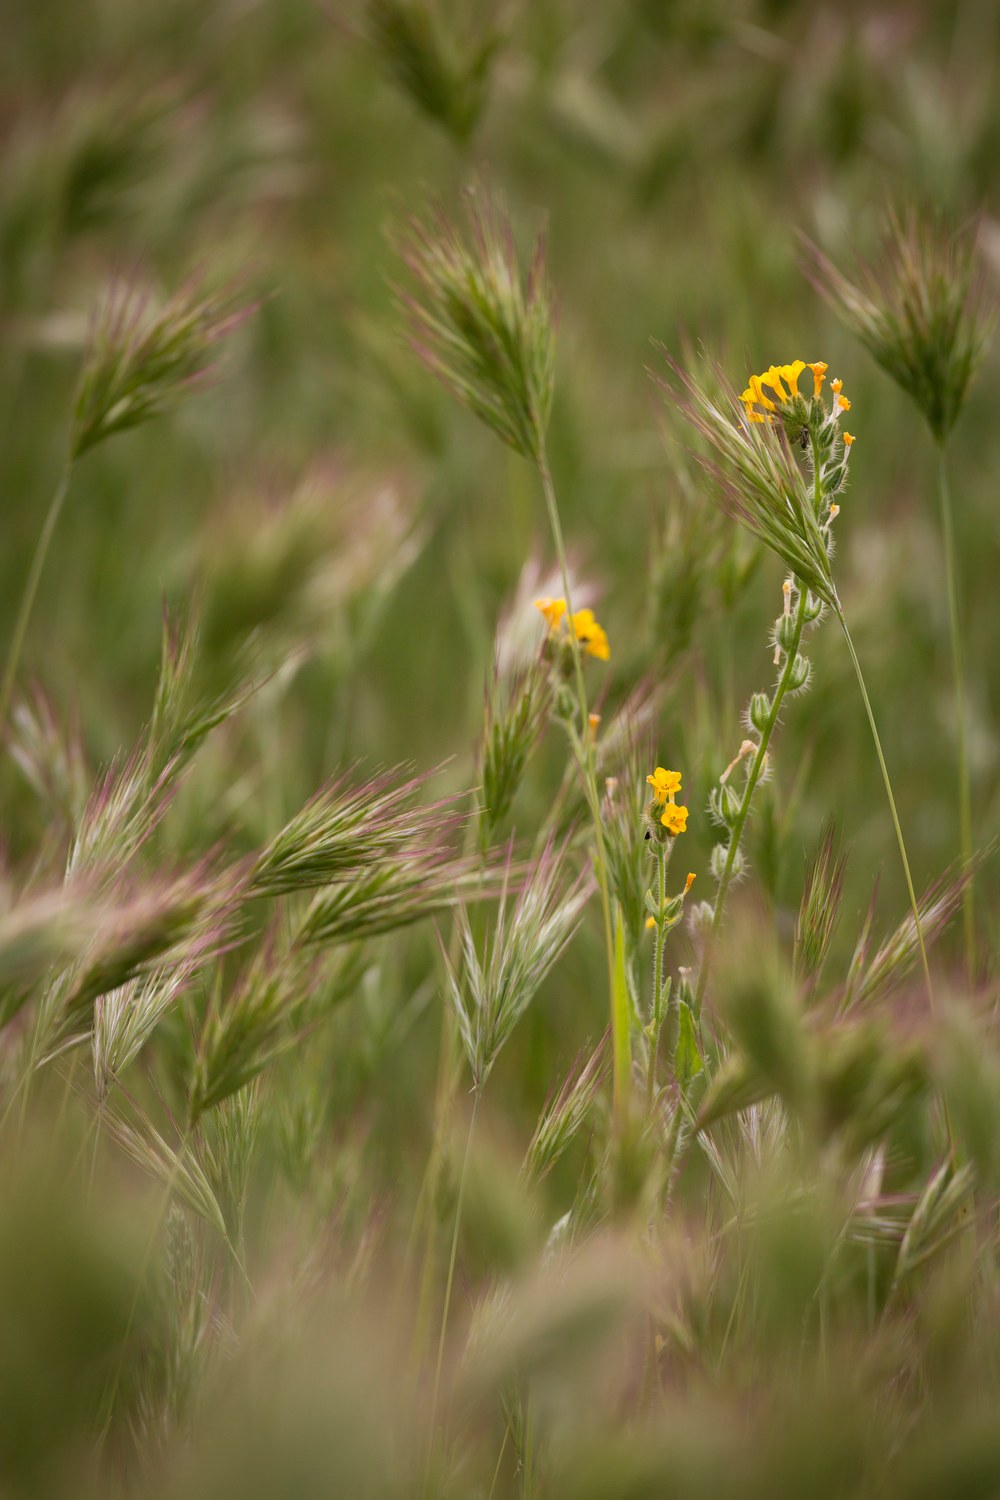 A yellow fiddleneck flower blooms amoung out of focus Red Broome grass.